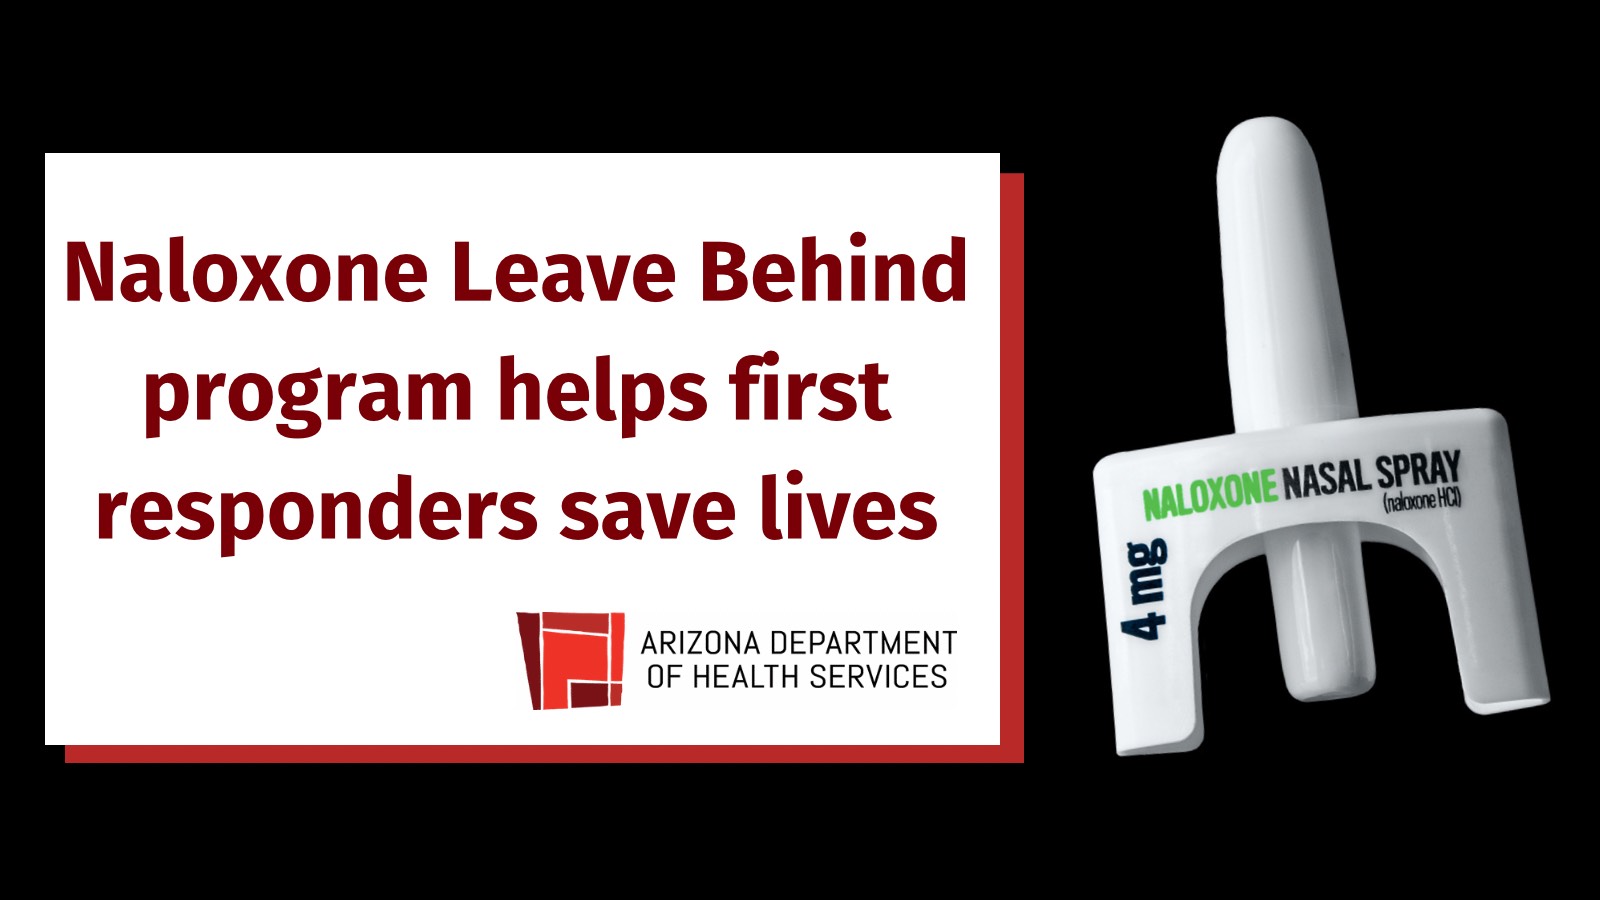 Naloxone Leave Behind program helps first responders save lives